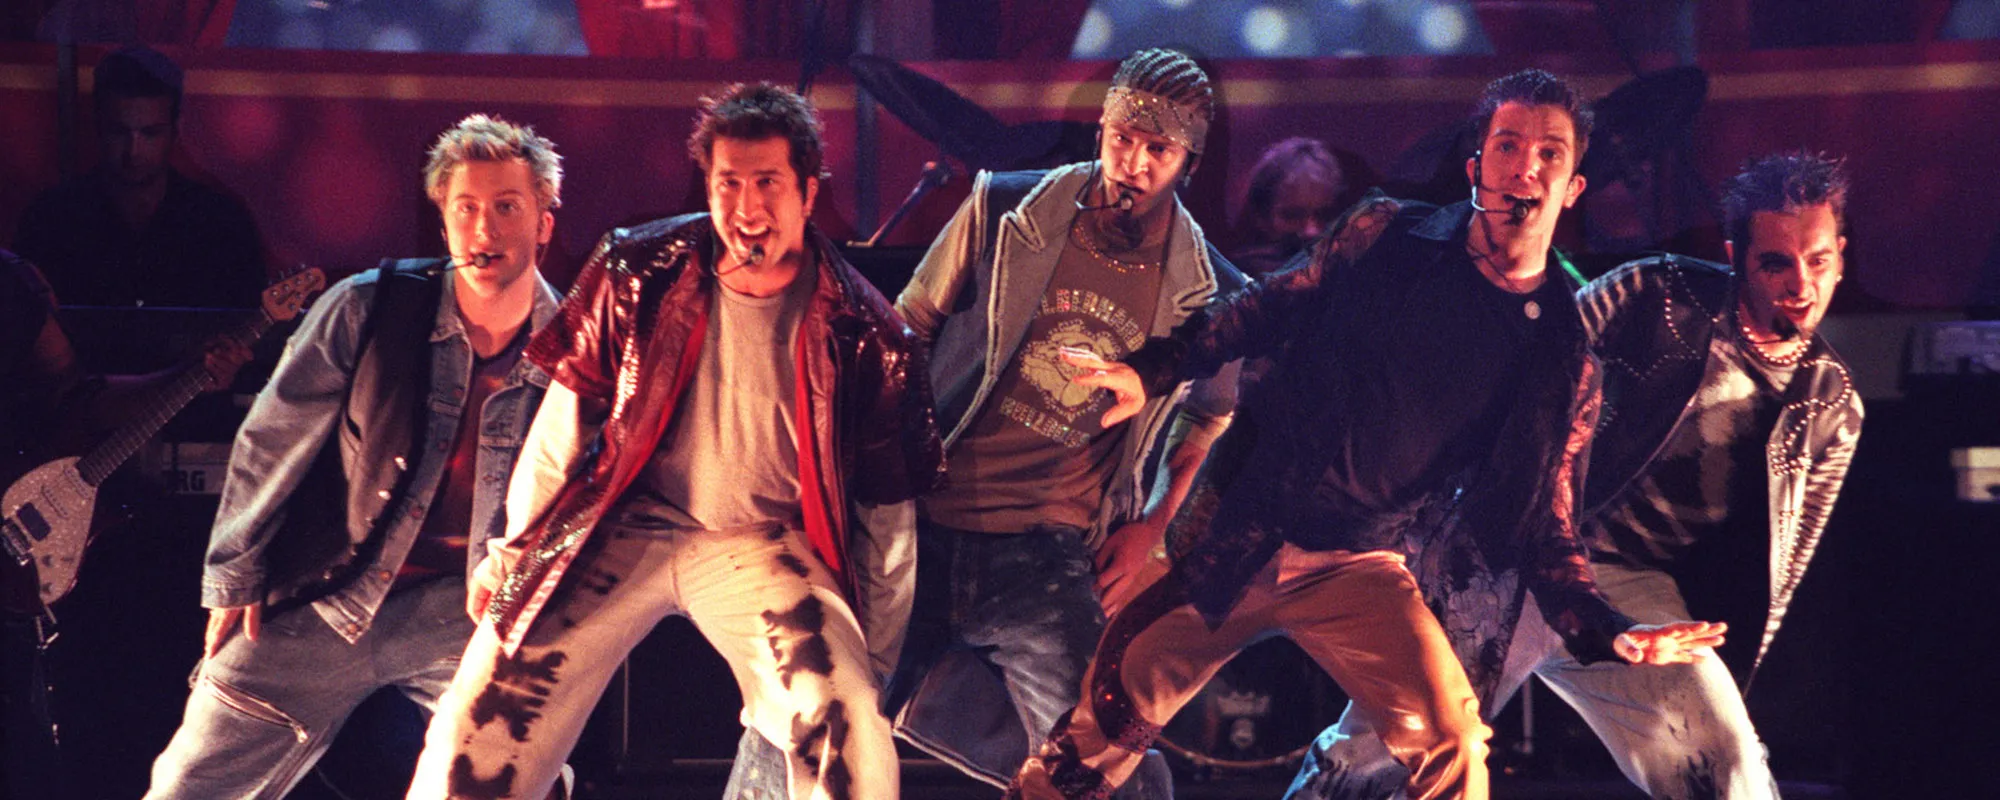 Mysterious ‘Trolls’ Movie Posters Tease a New *NSYNC Song